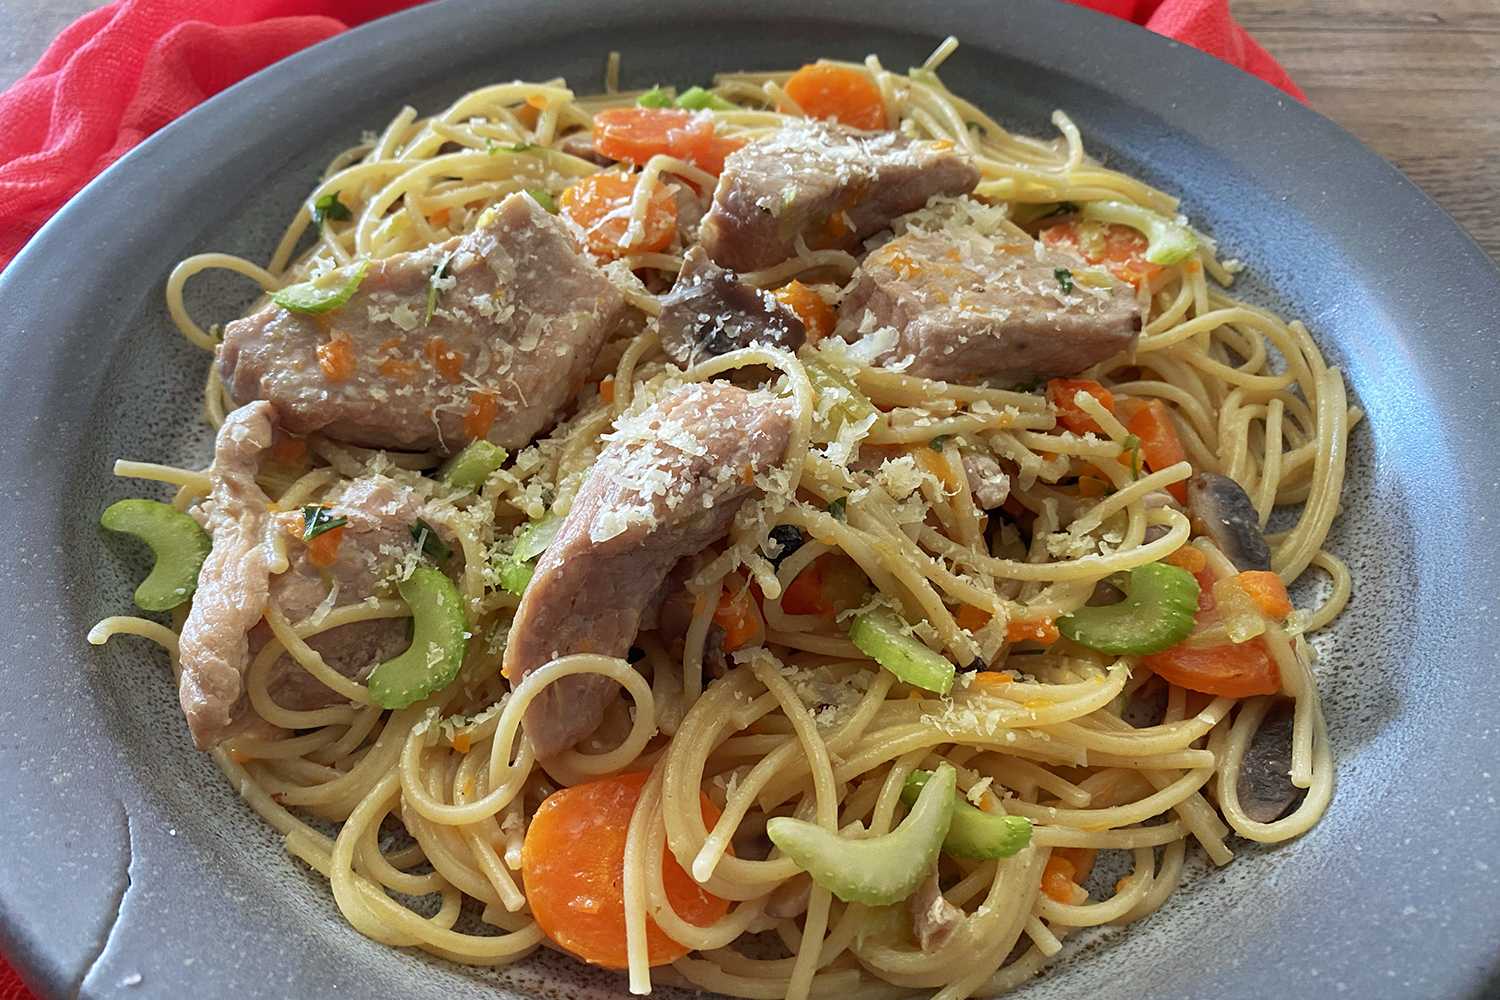 Egg noodles with beef chunks, carrot slices and celery slices on a blue plate